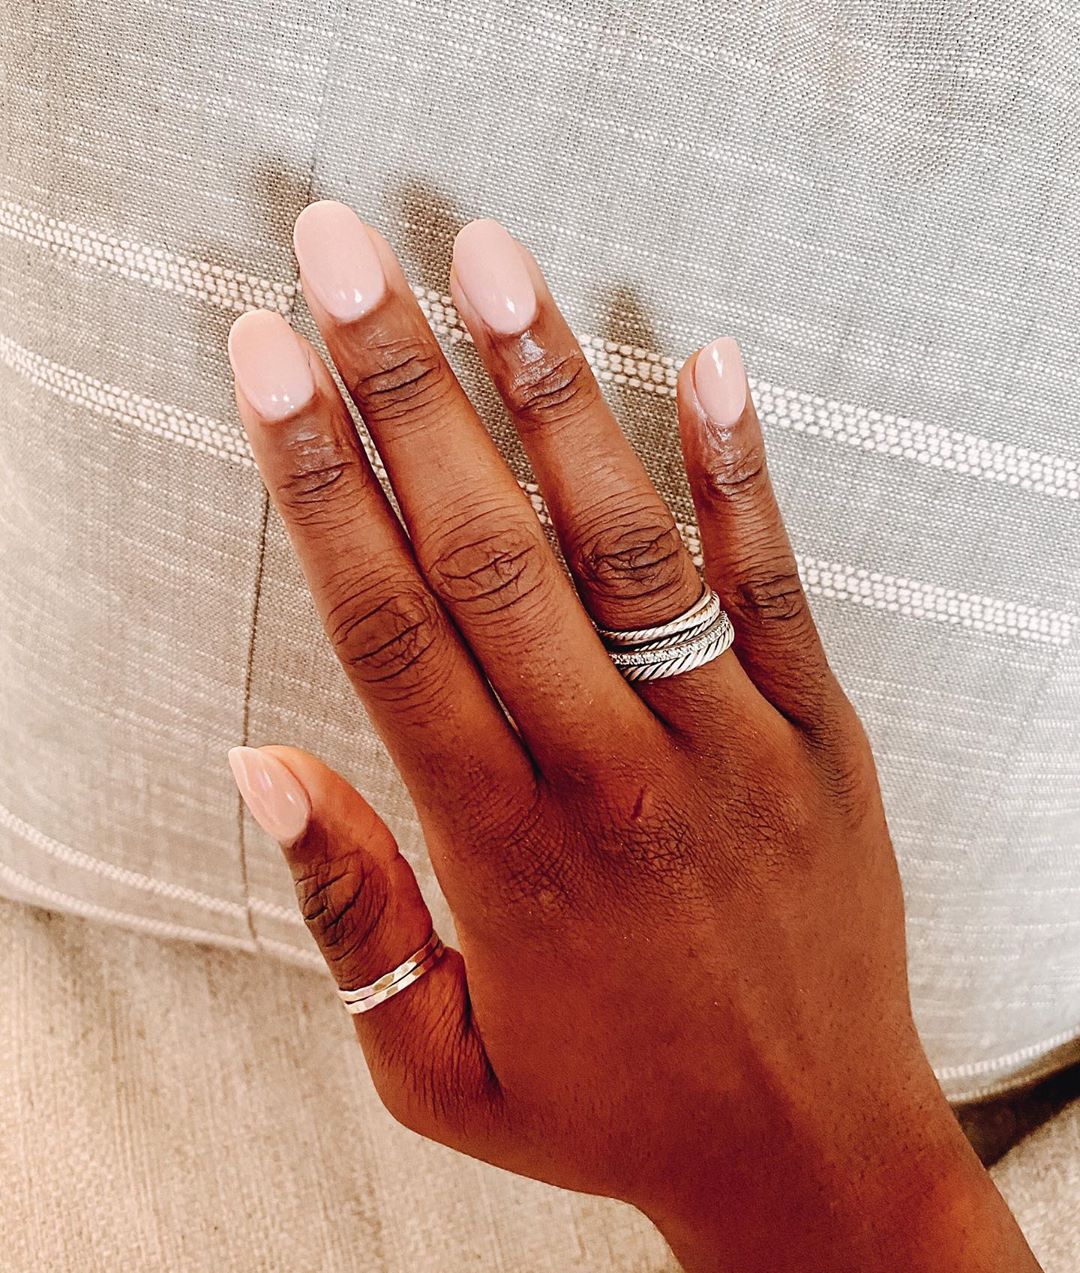 How To Find The Best Nail Shape For Your Hands